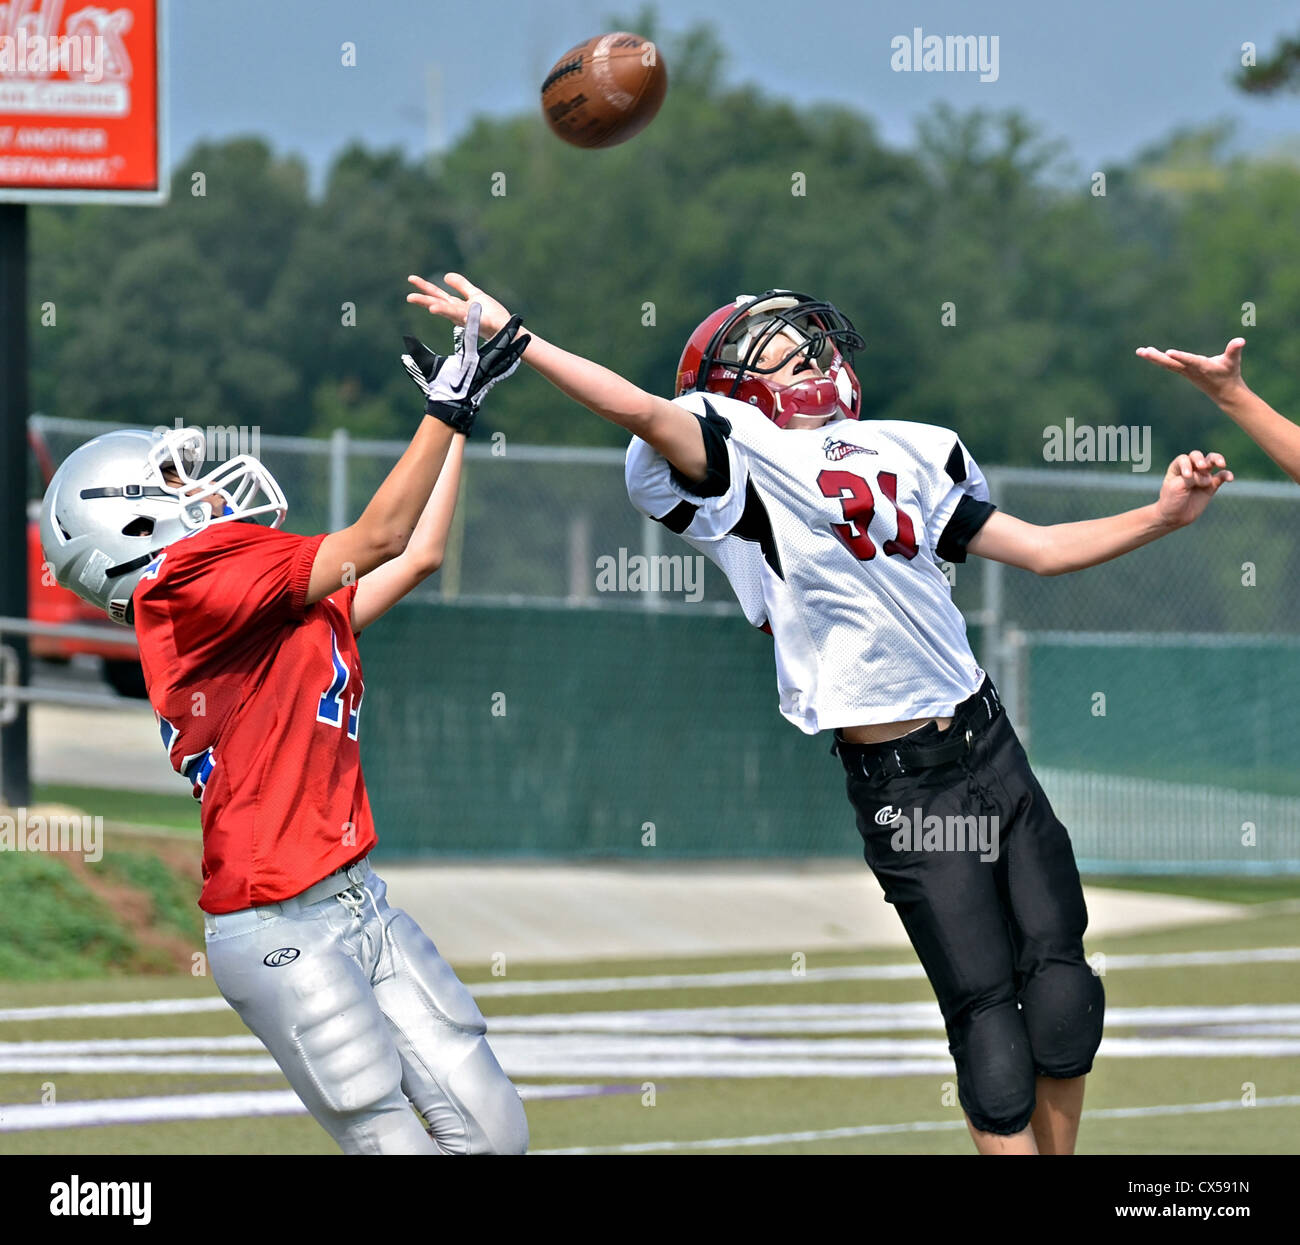 At the end zone a young boy reaching to catch the pass as a blocker tries to intercept. Stock Photo